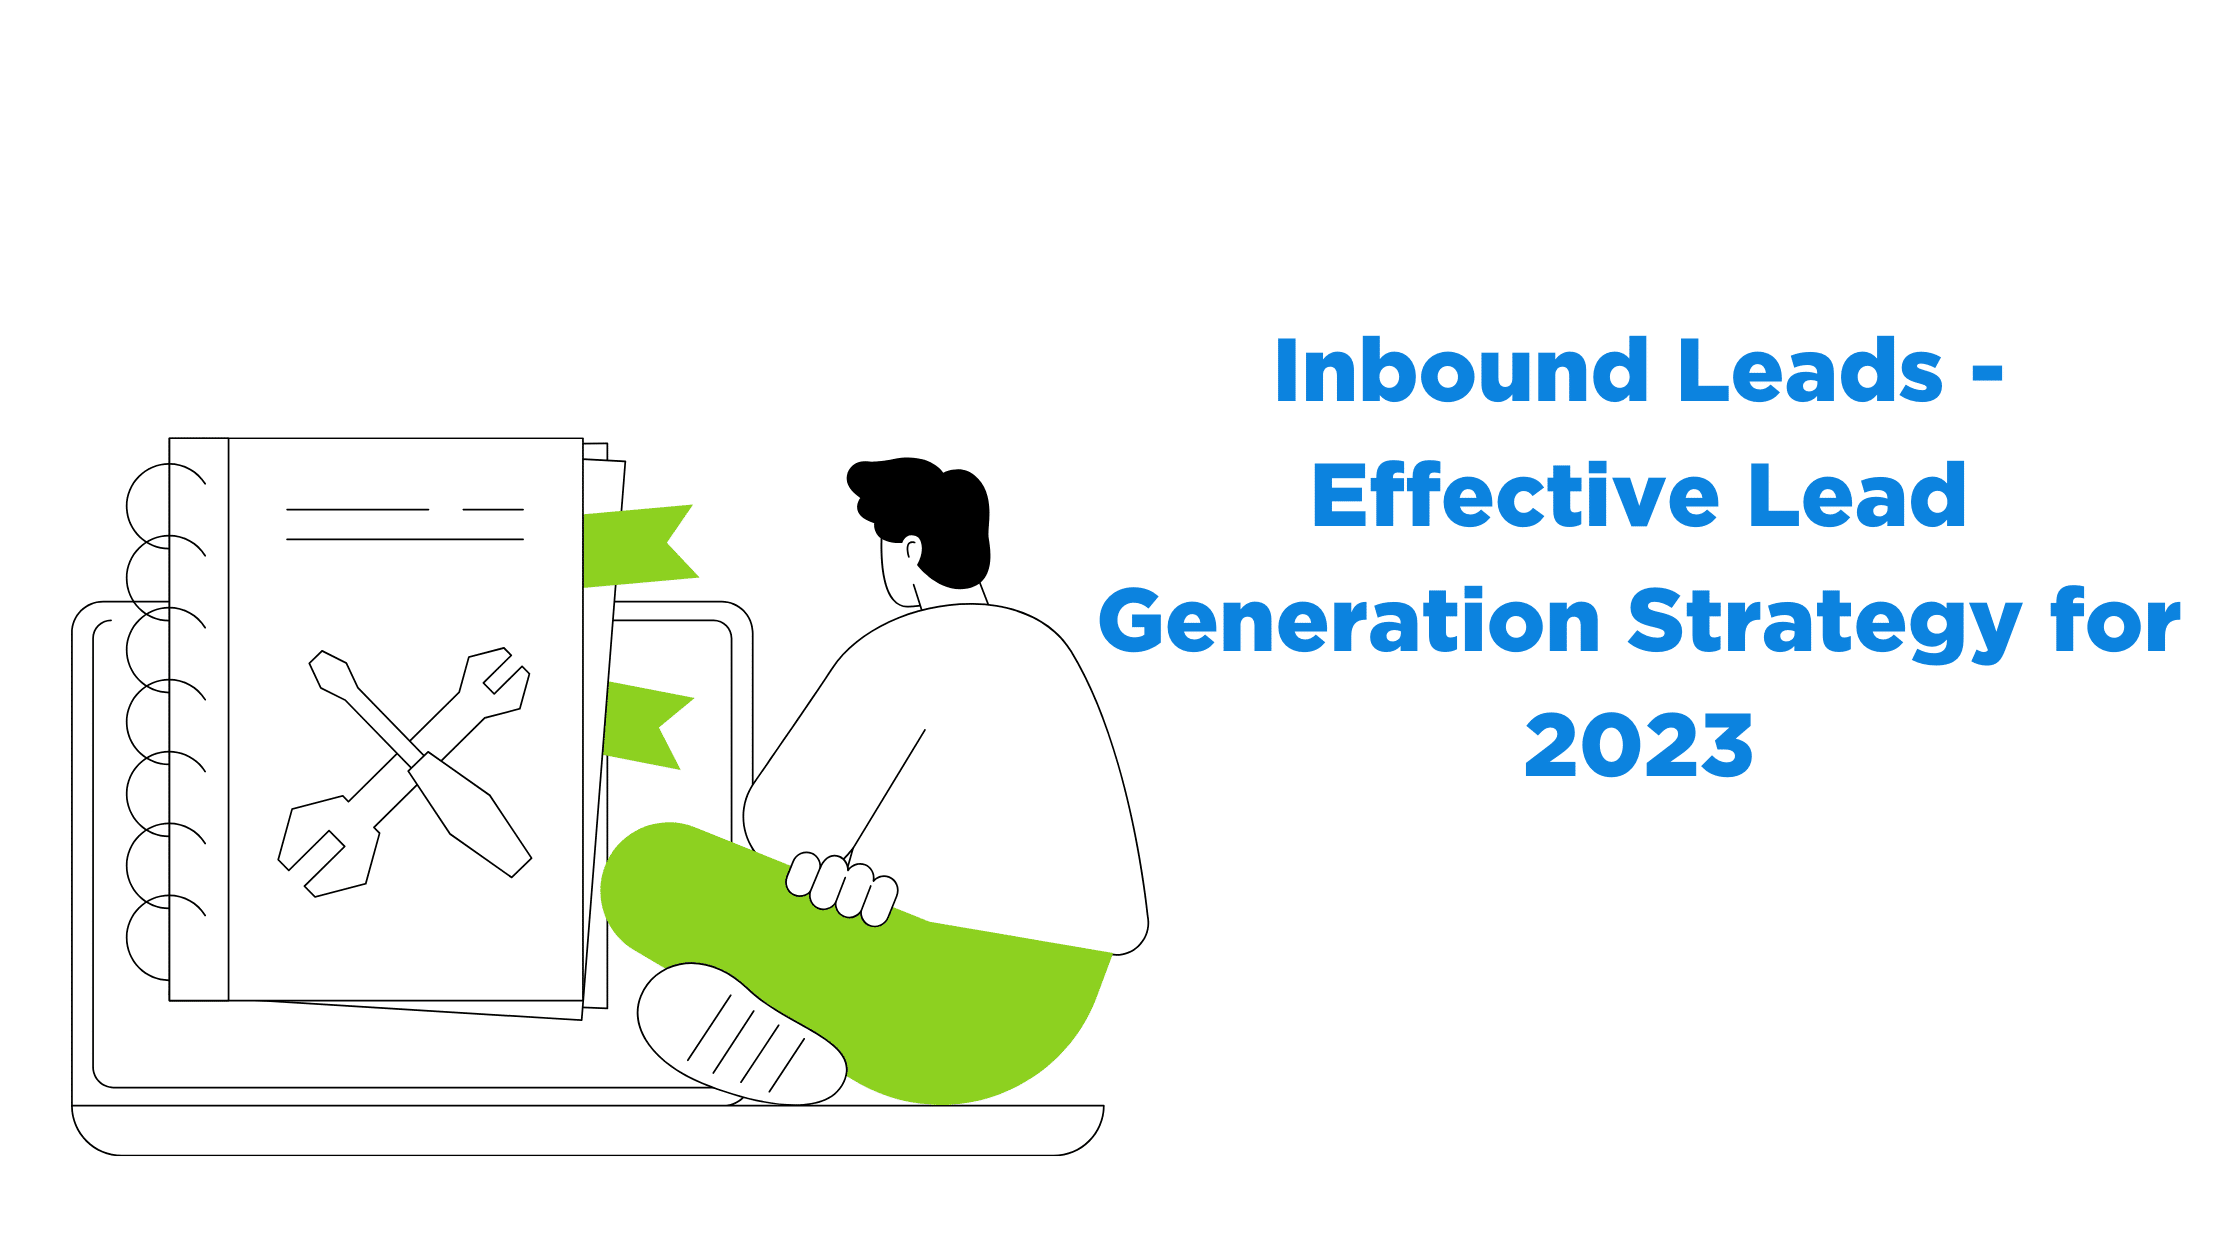 Inbound Leads - Effective Lead Generation Strategy for 2023